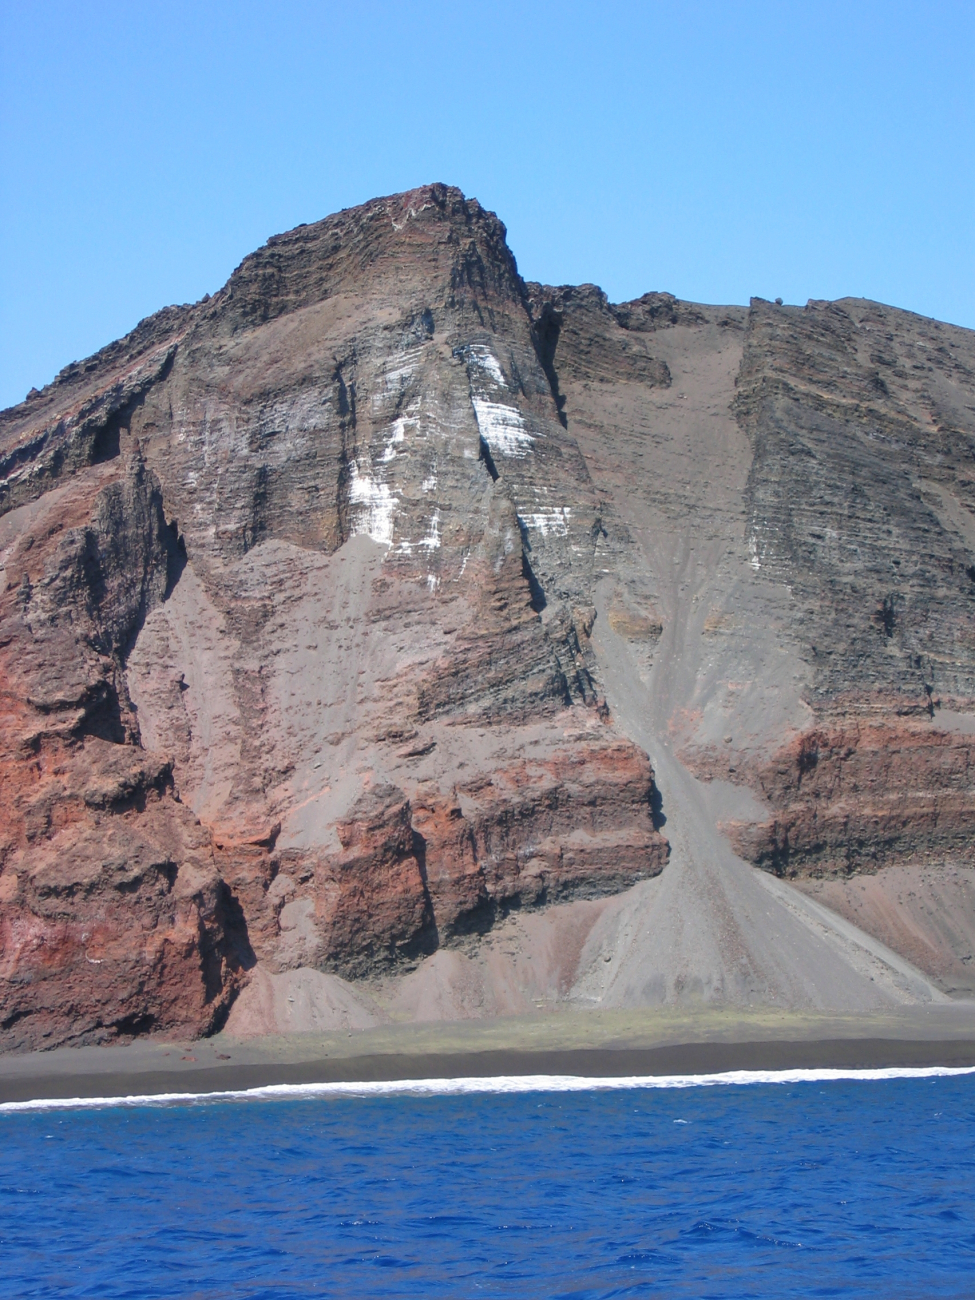 Interior structure of an eroded volcanic cone where it meets the sea